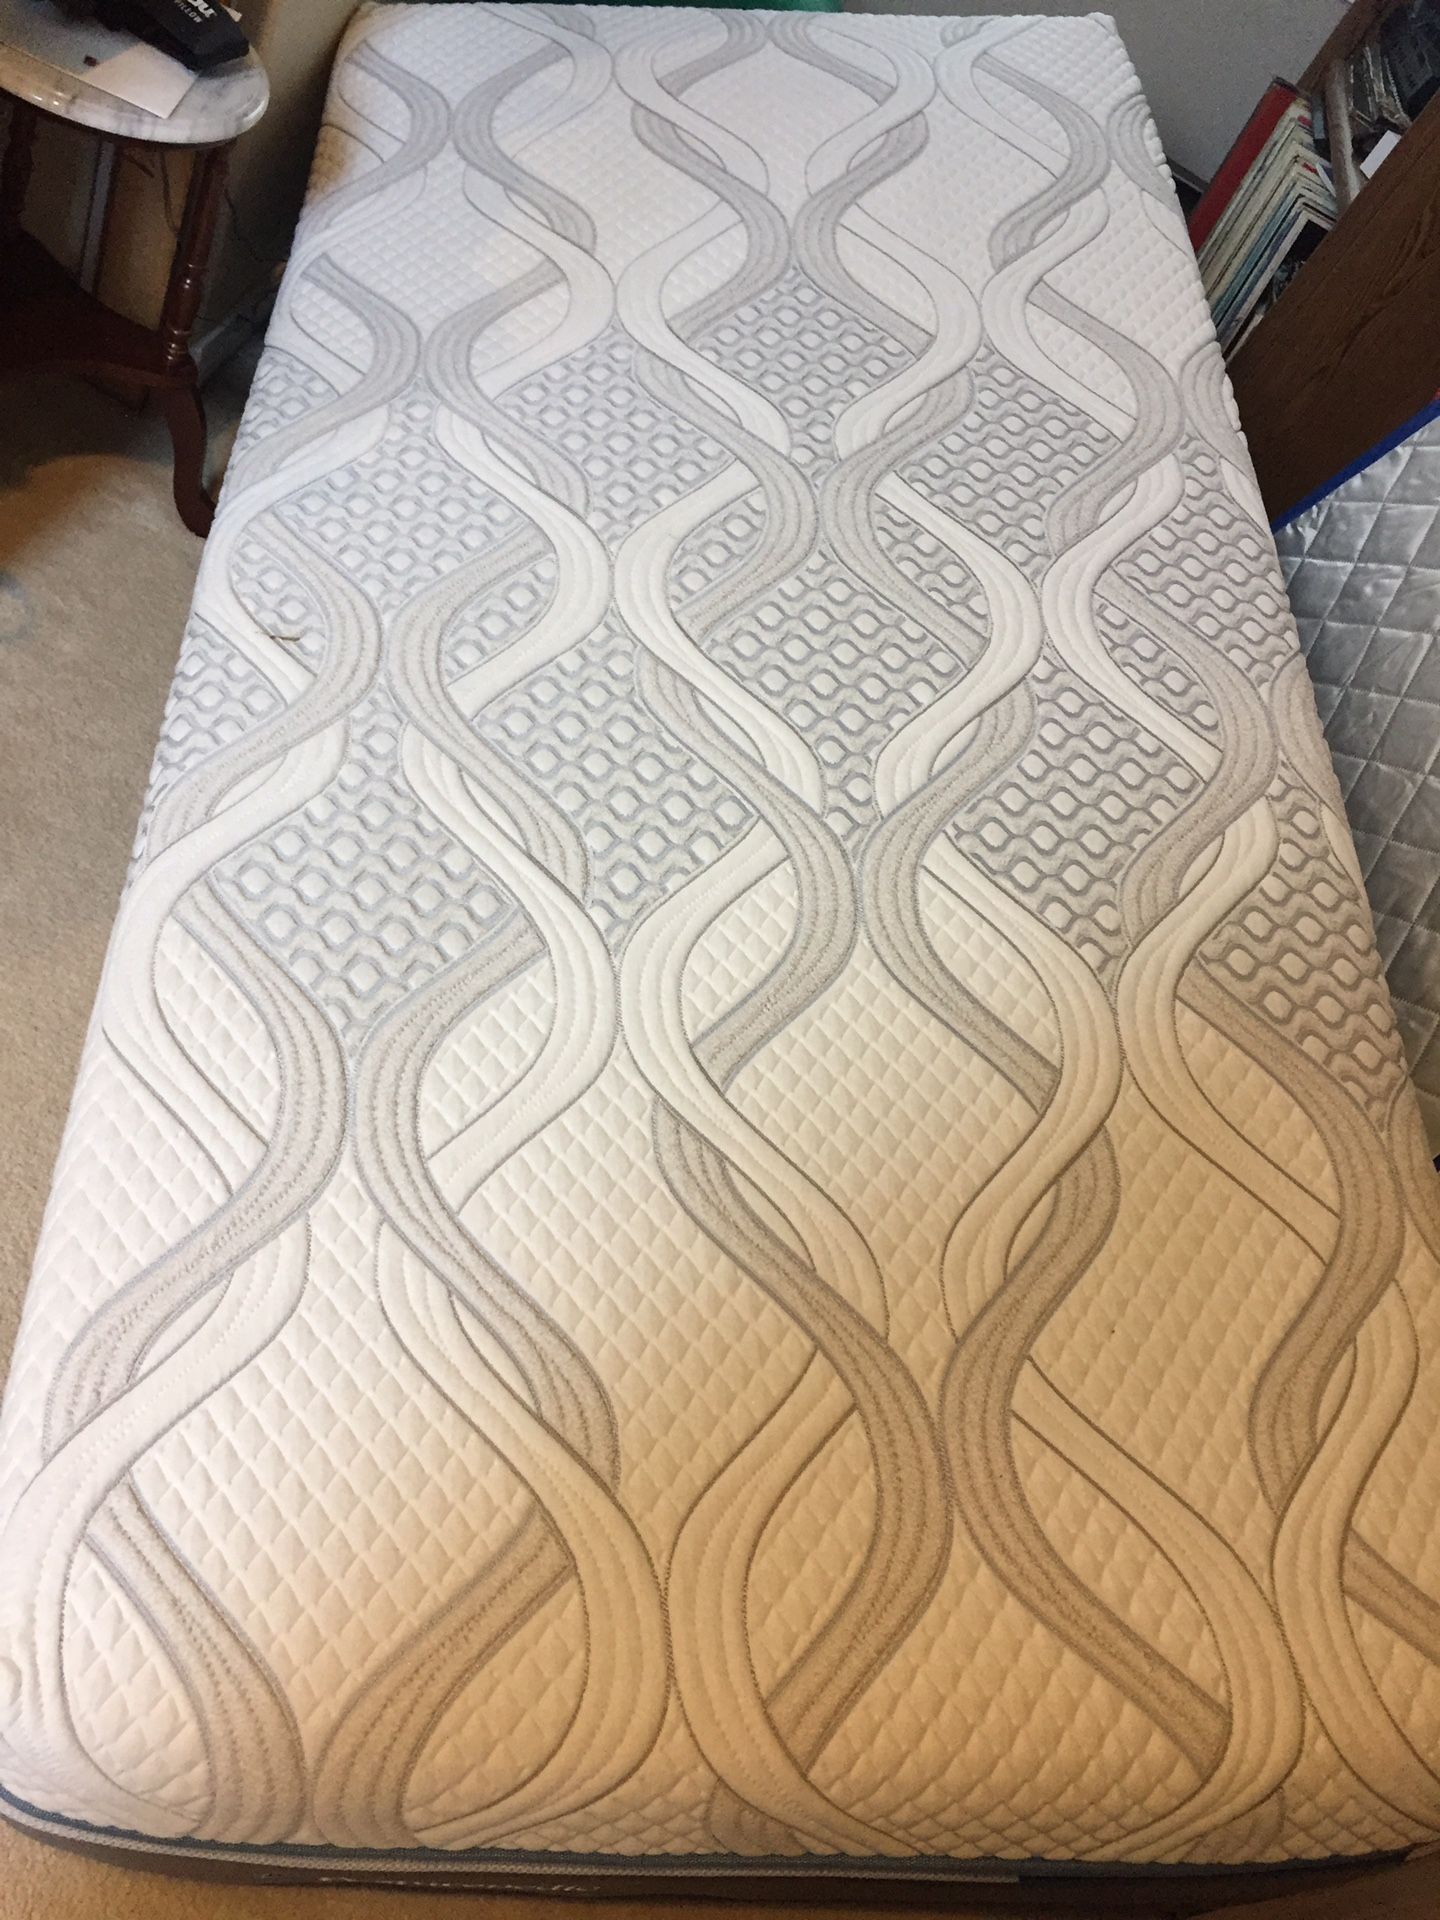 TwinXL mattress - Sealy posturepedic Hybrid elite. Used 6 months, great mattress but got a bigger bed. Excellent, extremely clean condition, paid $